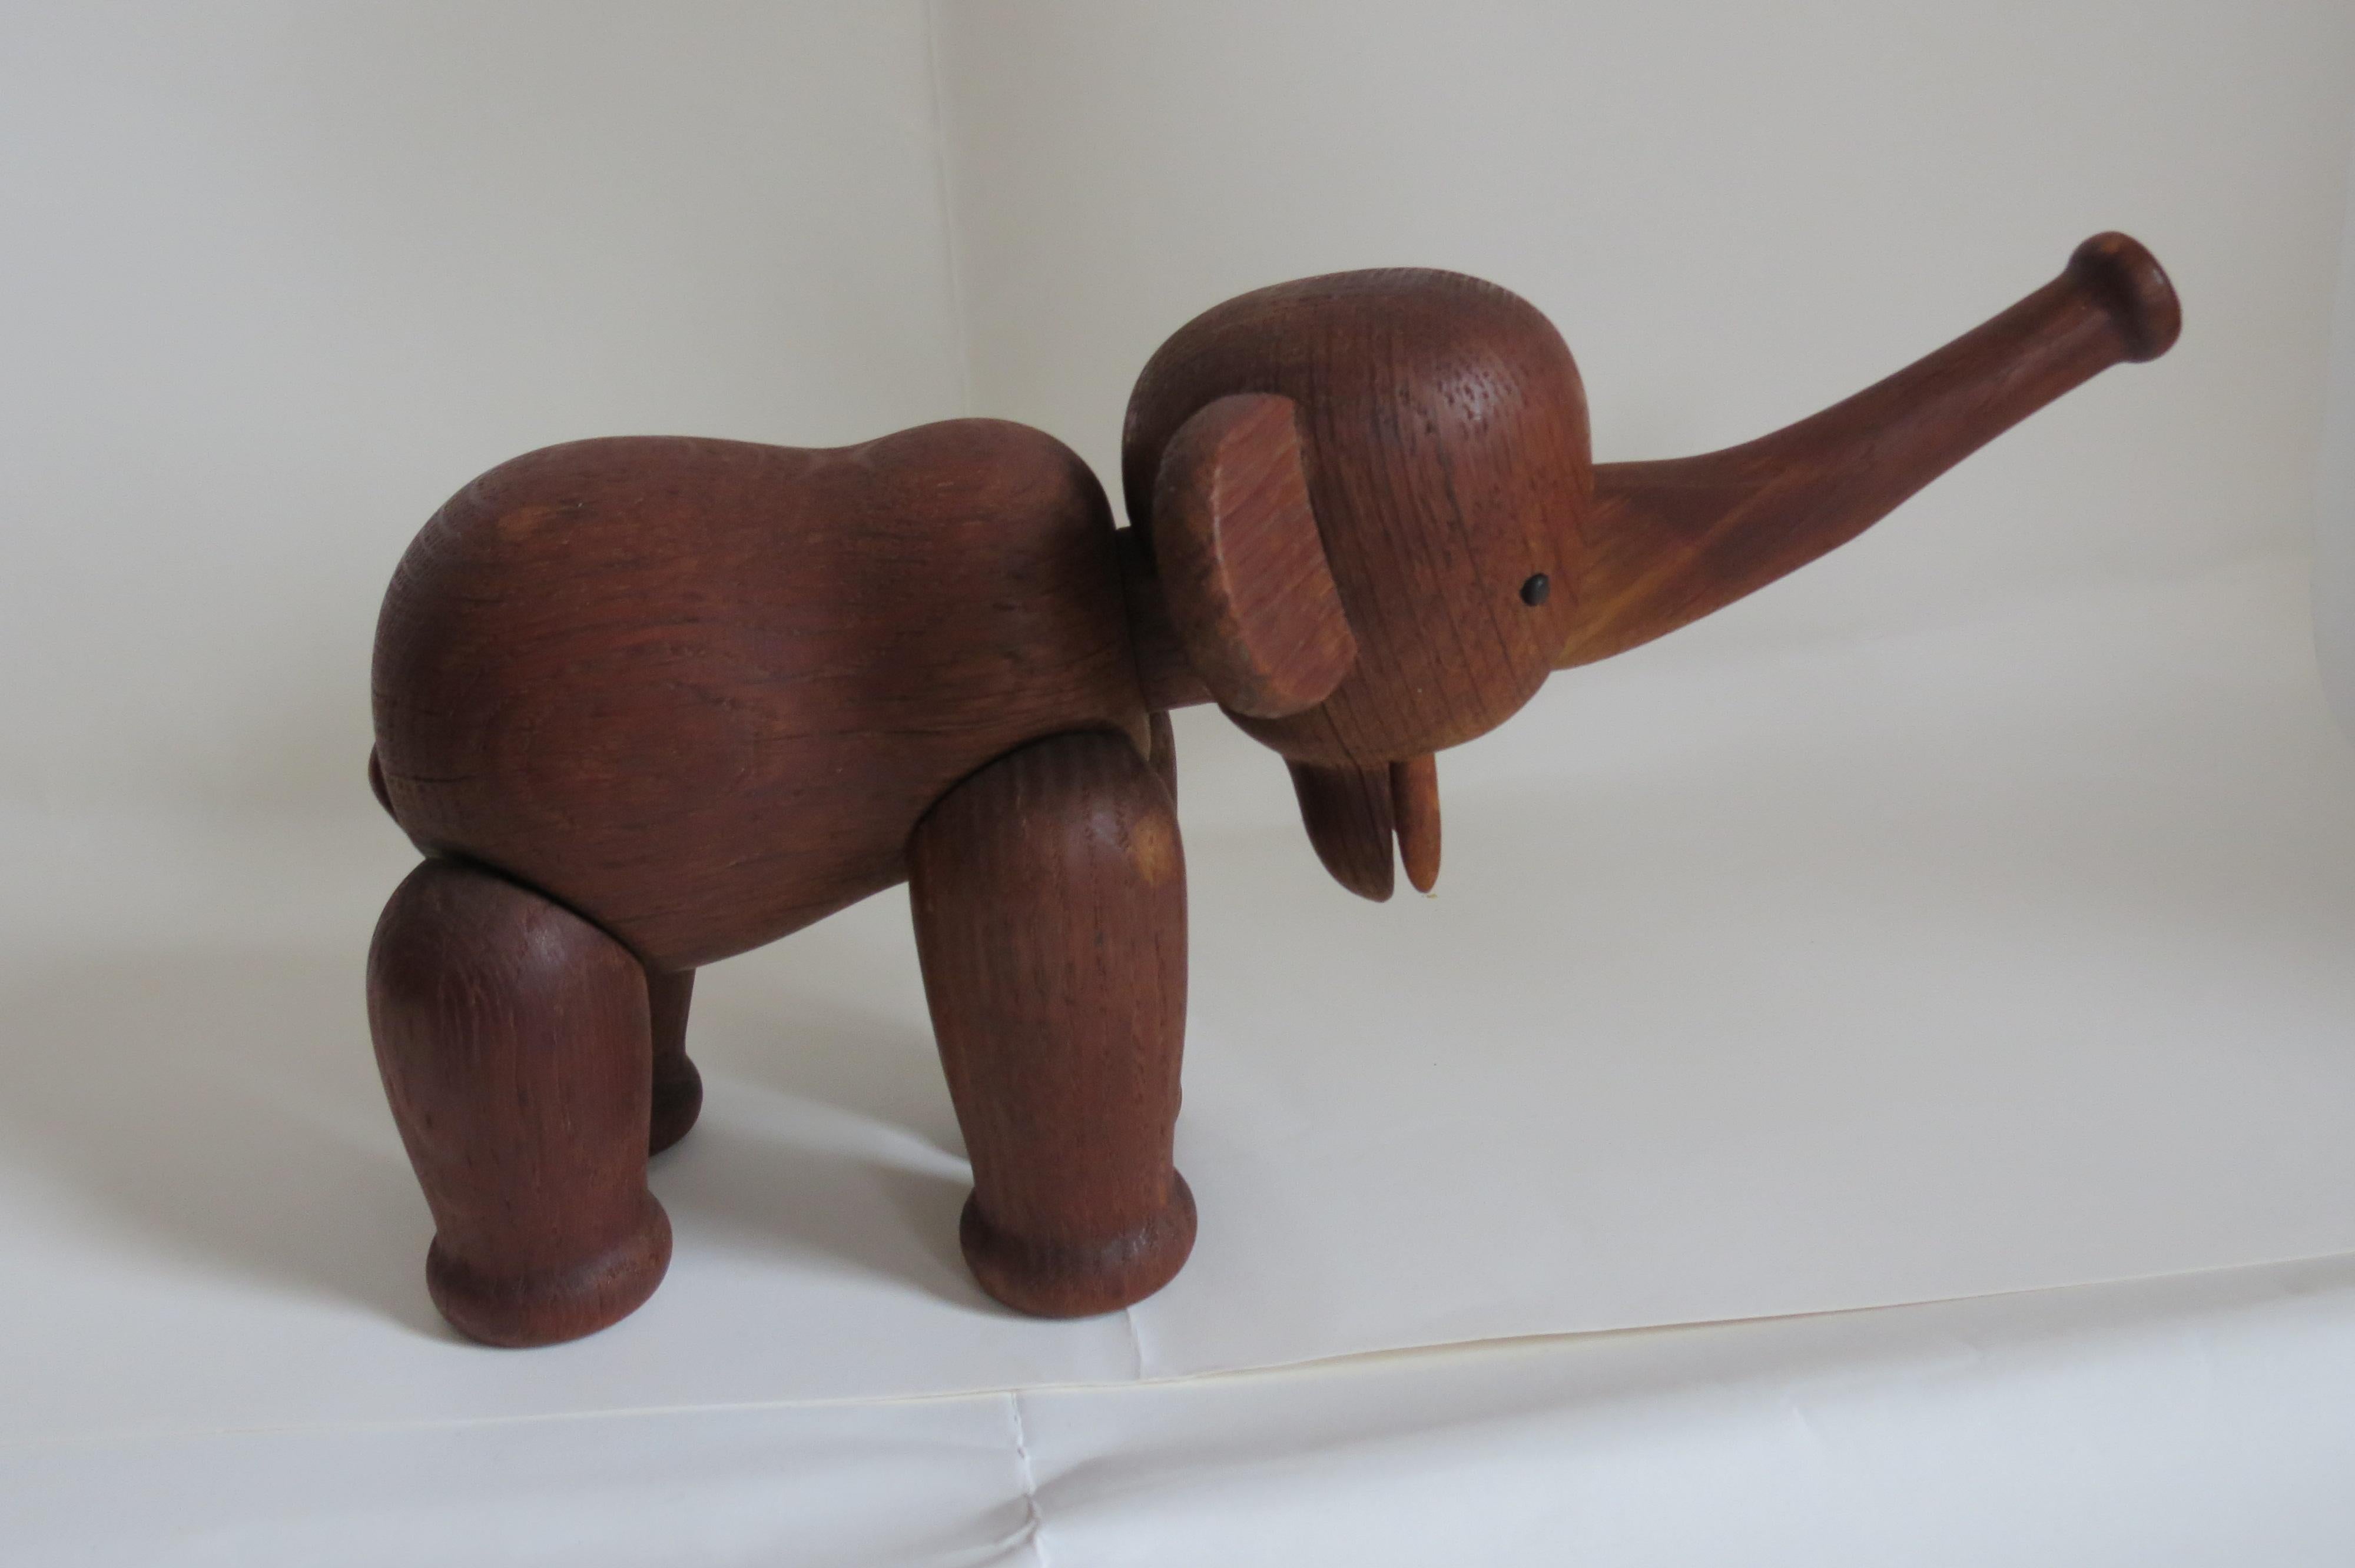 Original vintage Kay Bojesen elephant
A wonderful vintage elephant designed and produced by Kay Bojesen, Denmark. In lovely condition, made from solid oak and beautifully patinated over time. Stamped to the underside of one foot, Kay Bojesen